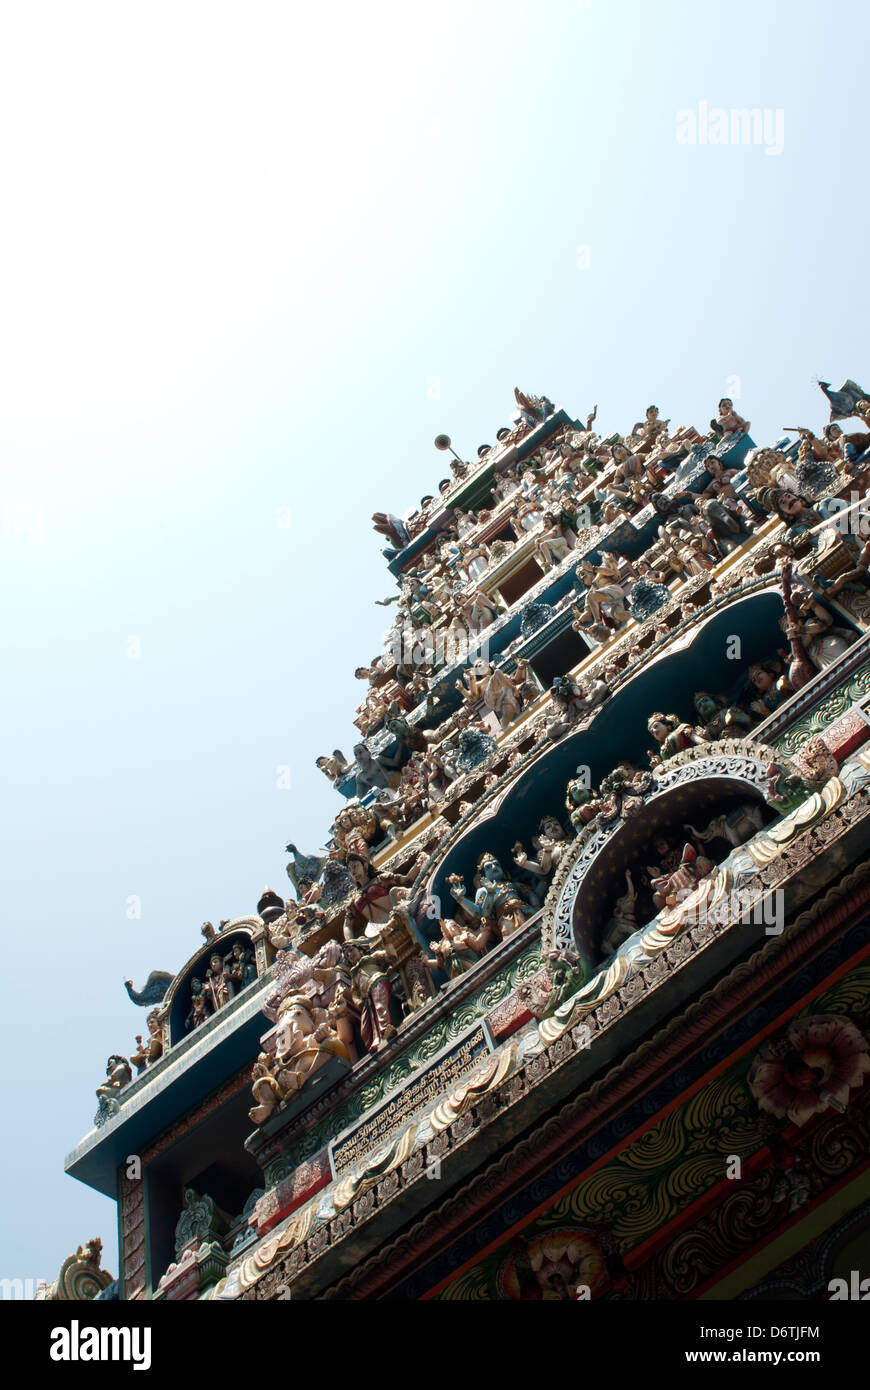 View looking upwards at deities adorning the a Hindu Temple in the Pettah market in Colombo, Sri Lanka. Stock Photo